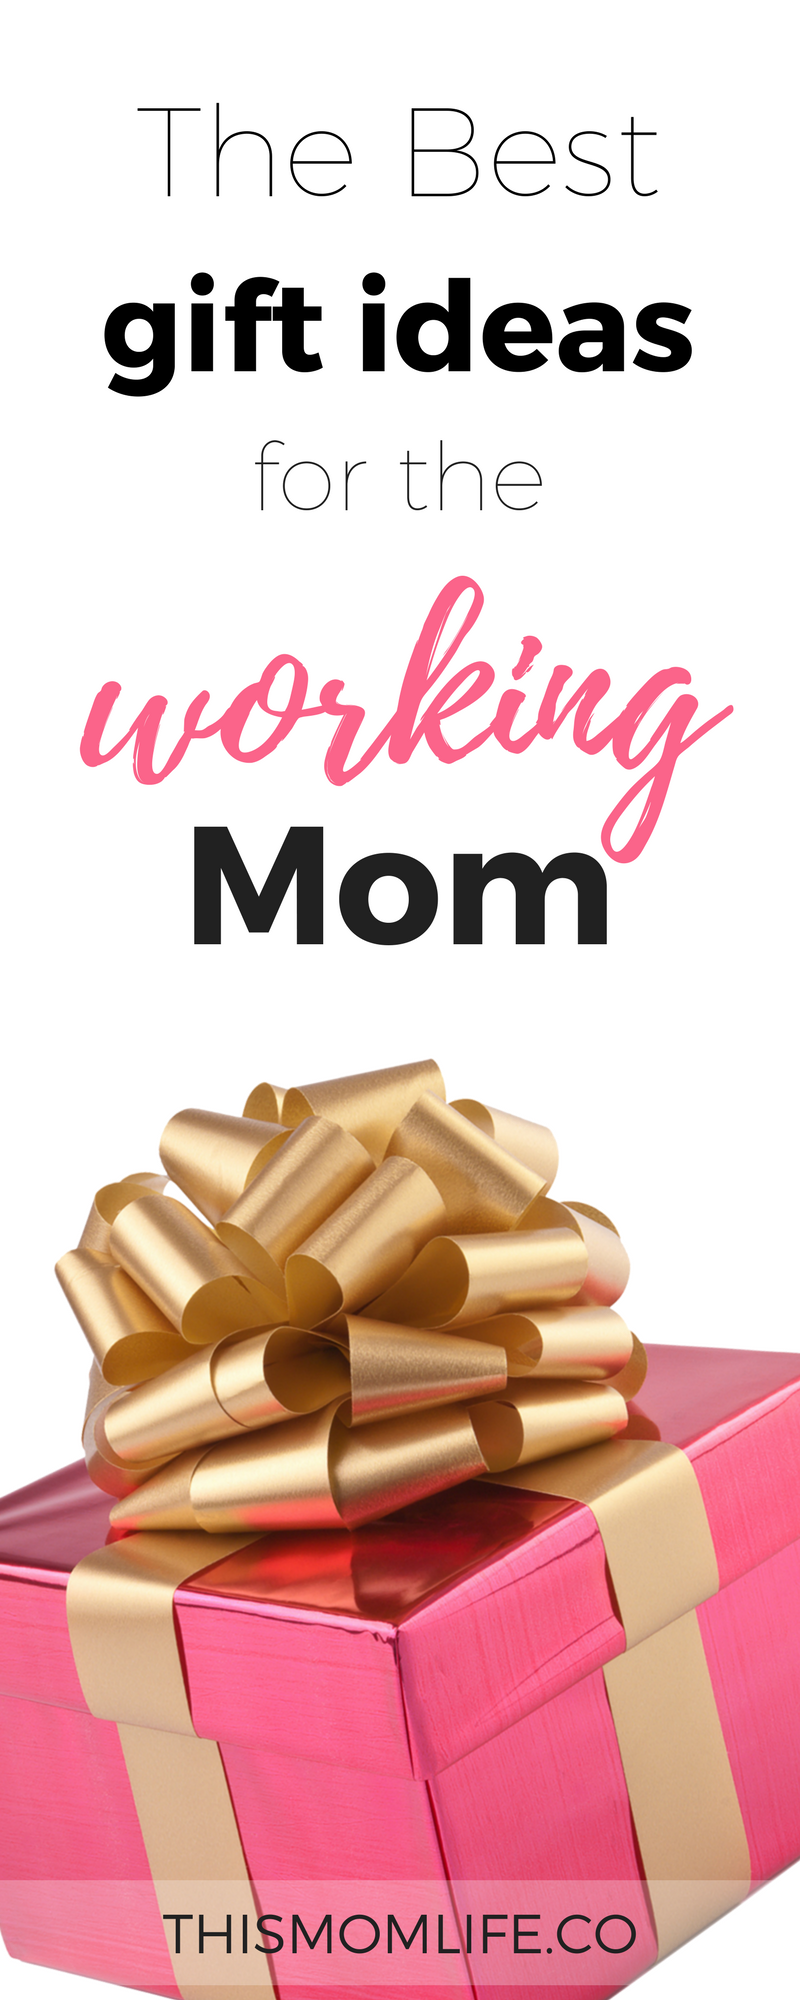 Busy Working Mom PNG - 165791